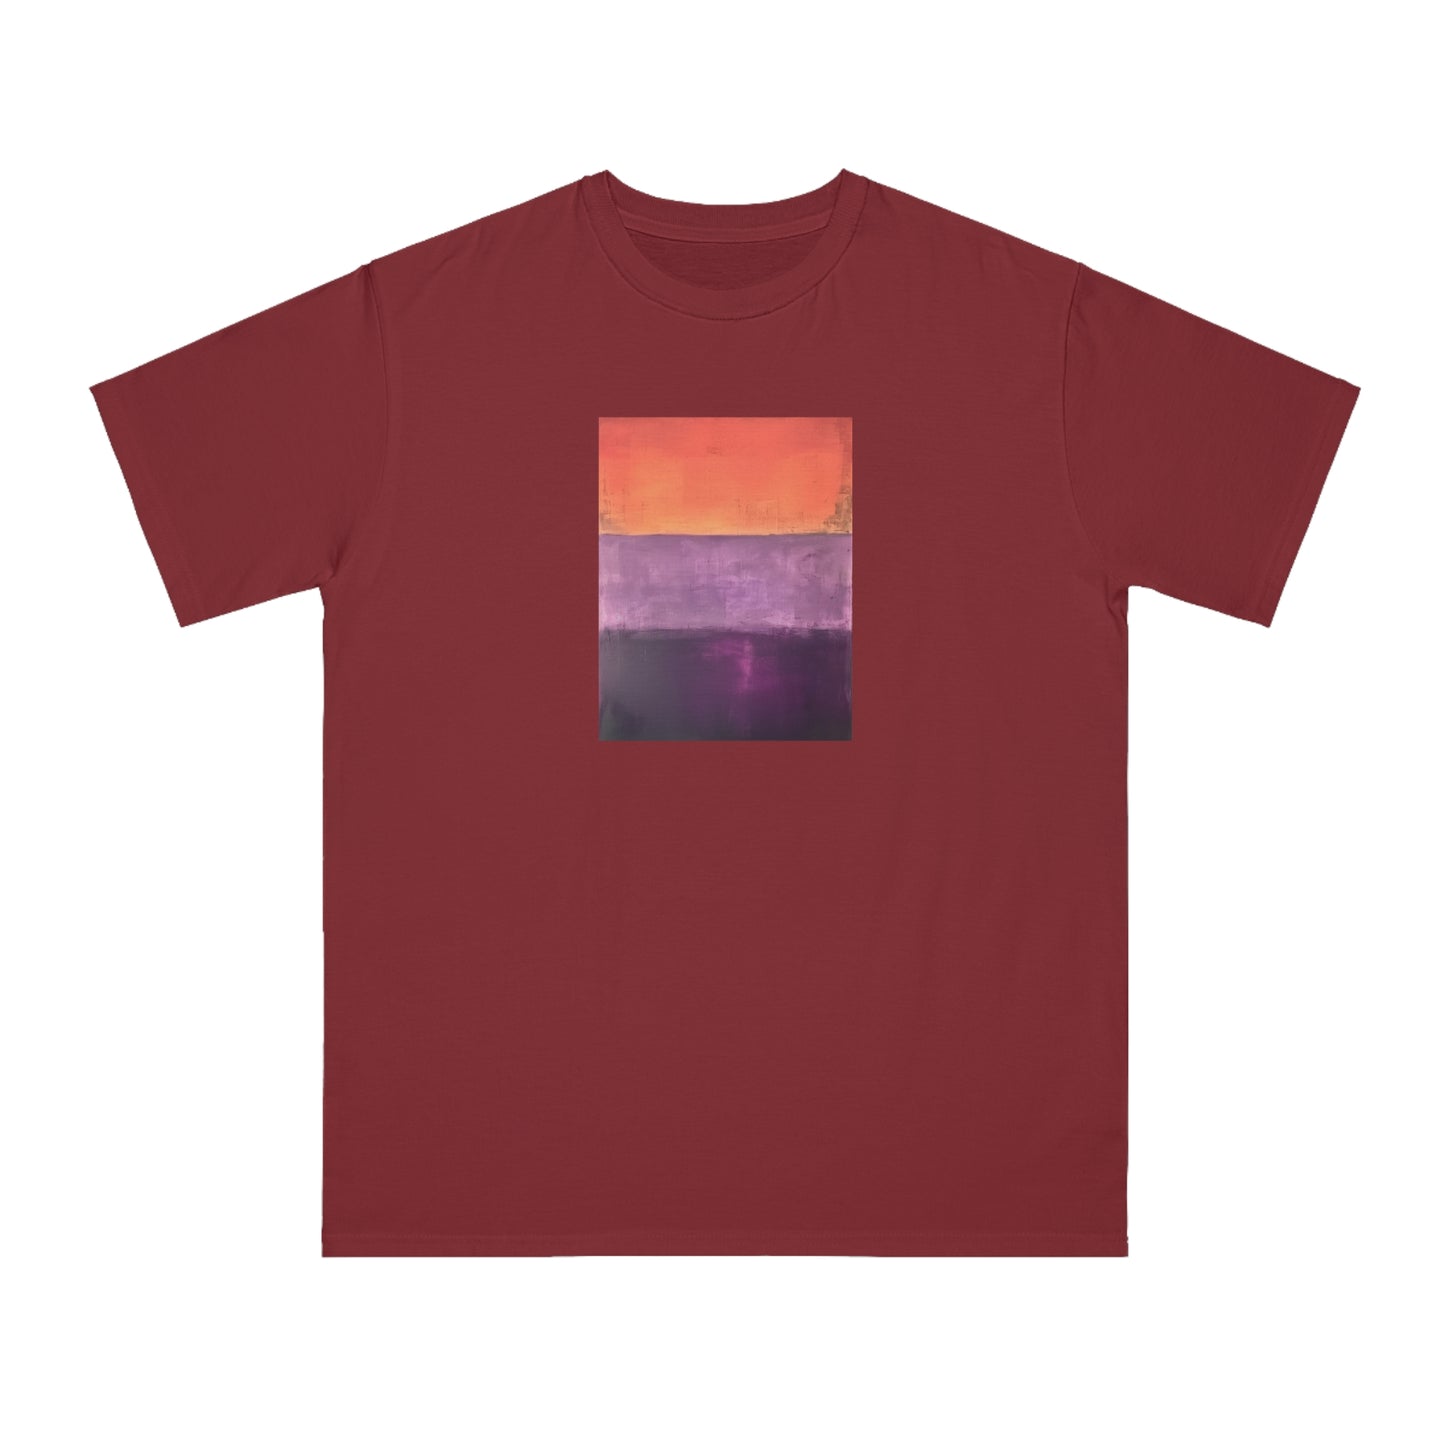 a red t - shirt with an orange and purple painting on it